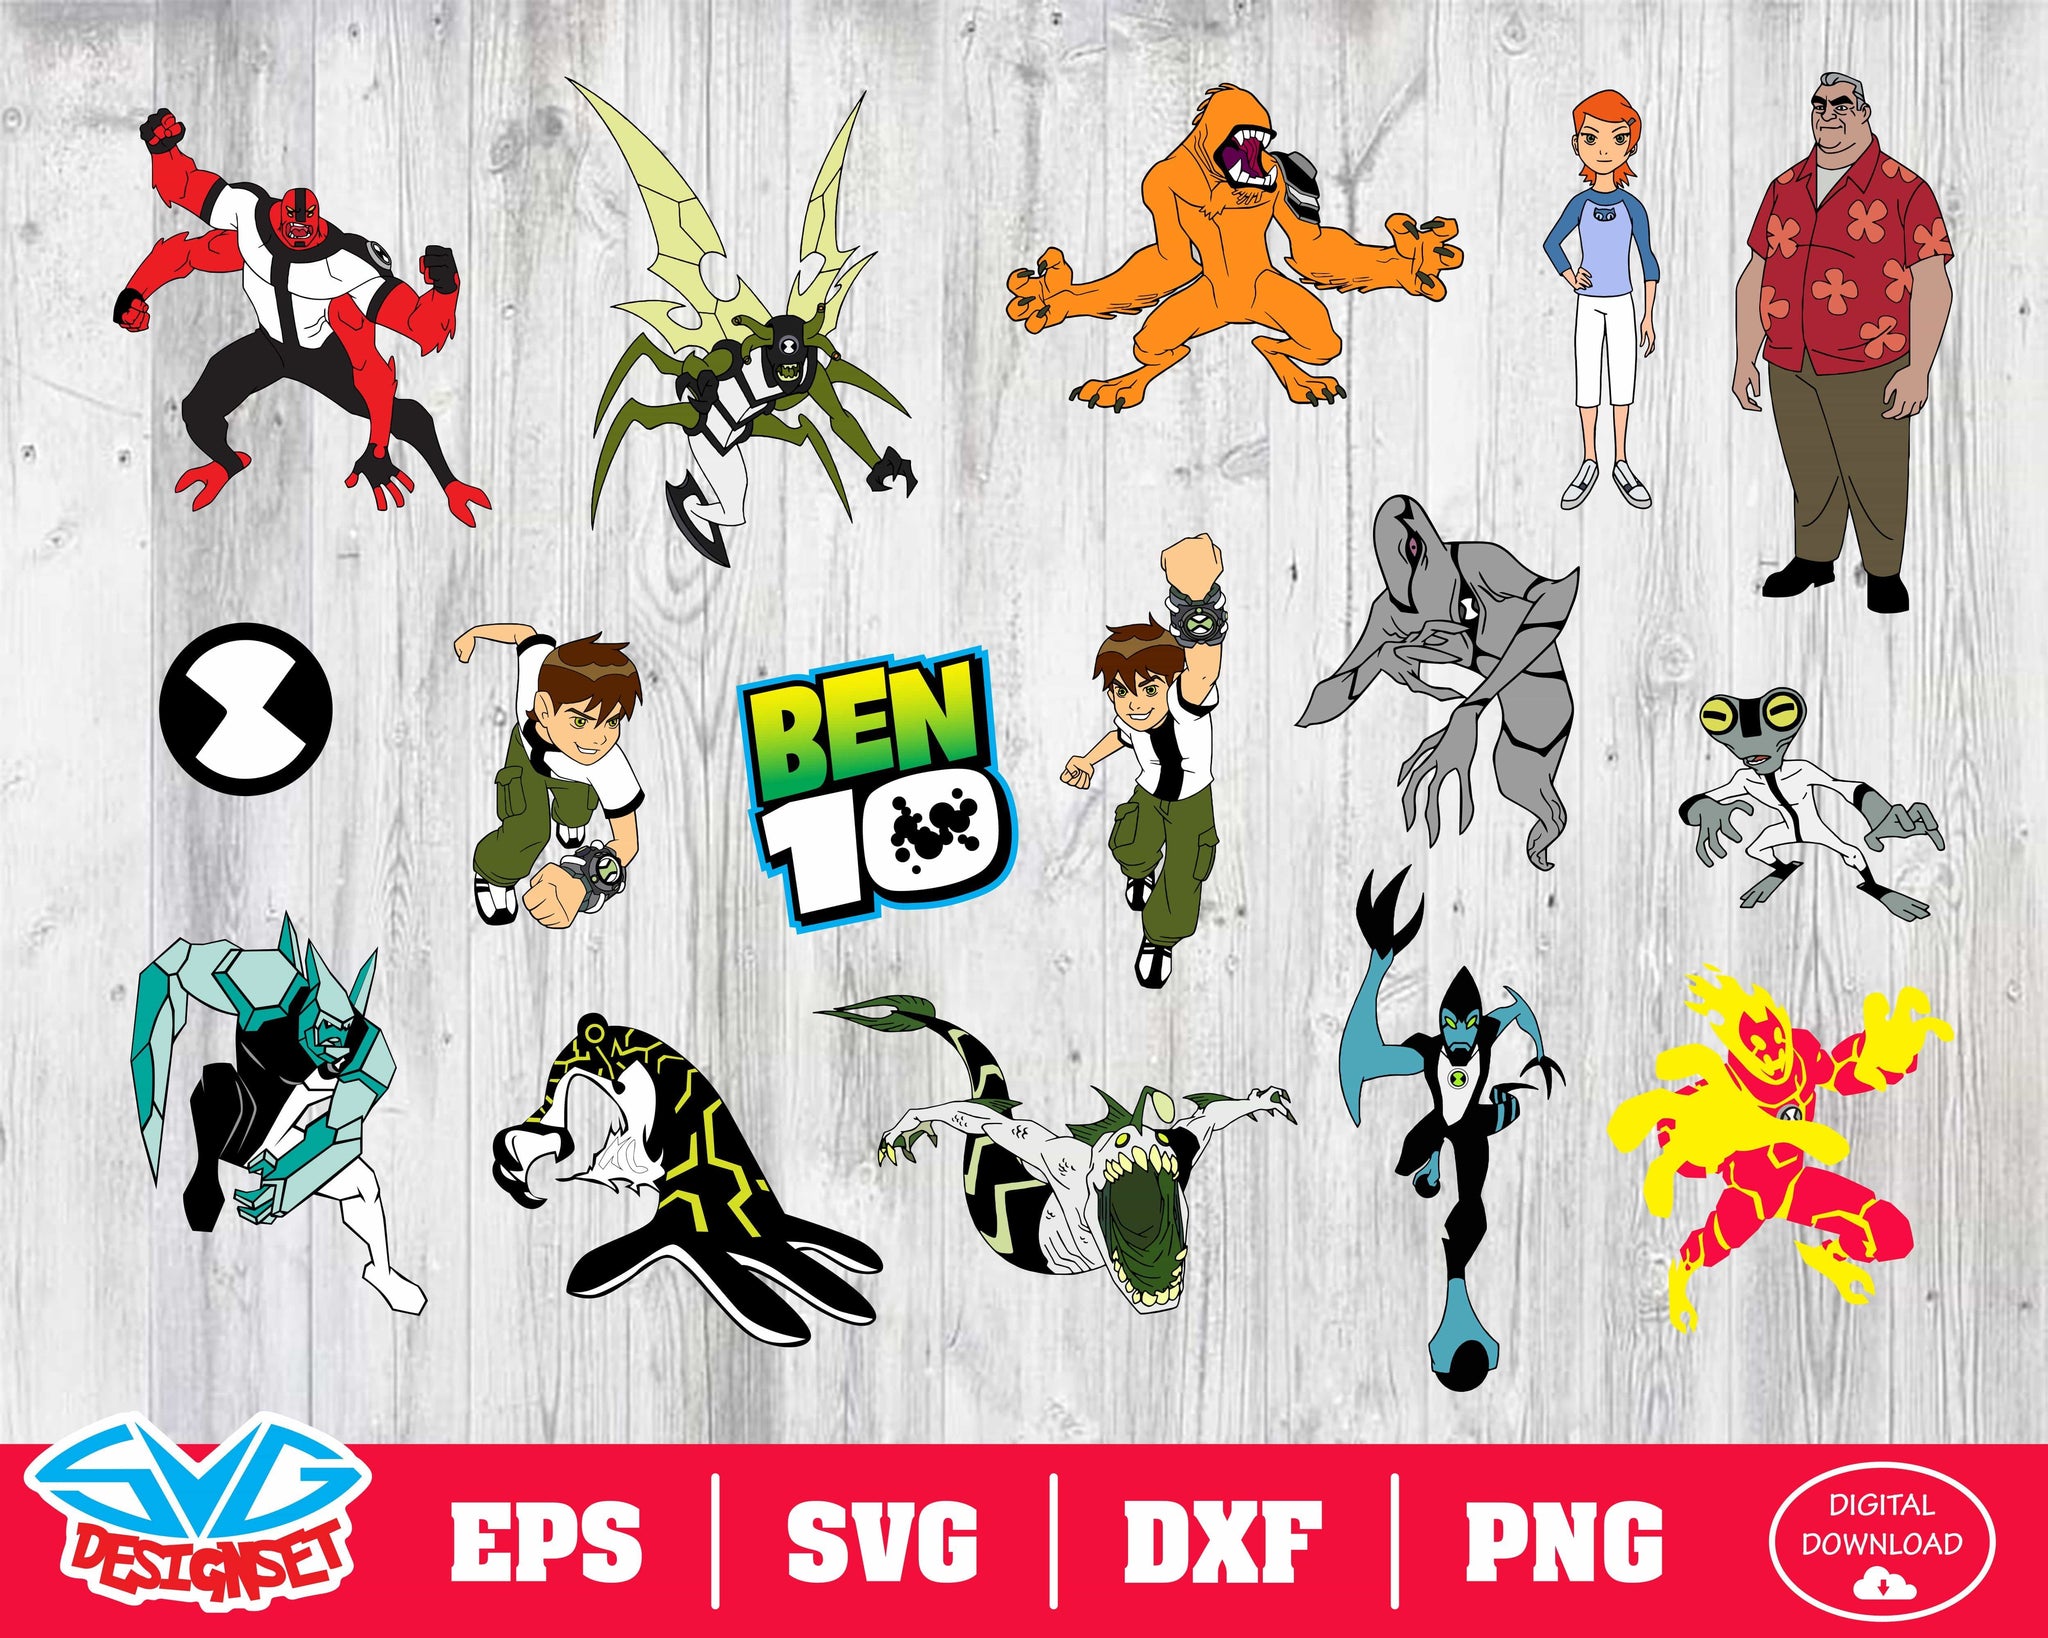 Ben 10 Svg, Dxf, Eps, Png, Clipart, Silhouette and Cutfiles - SVGDesignSets